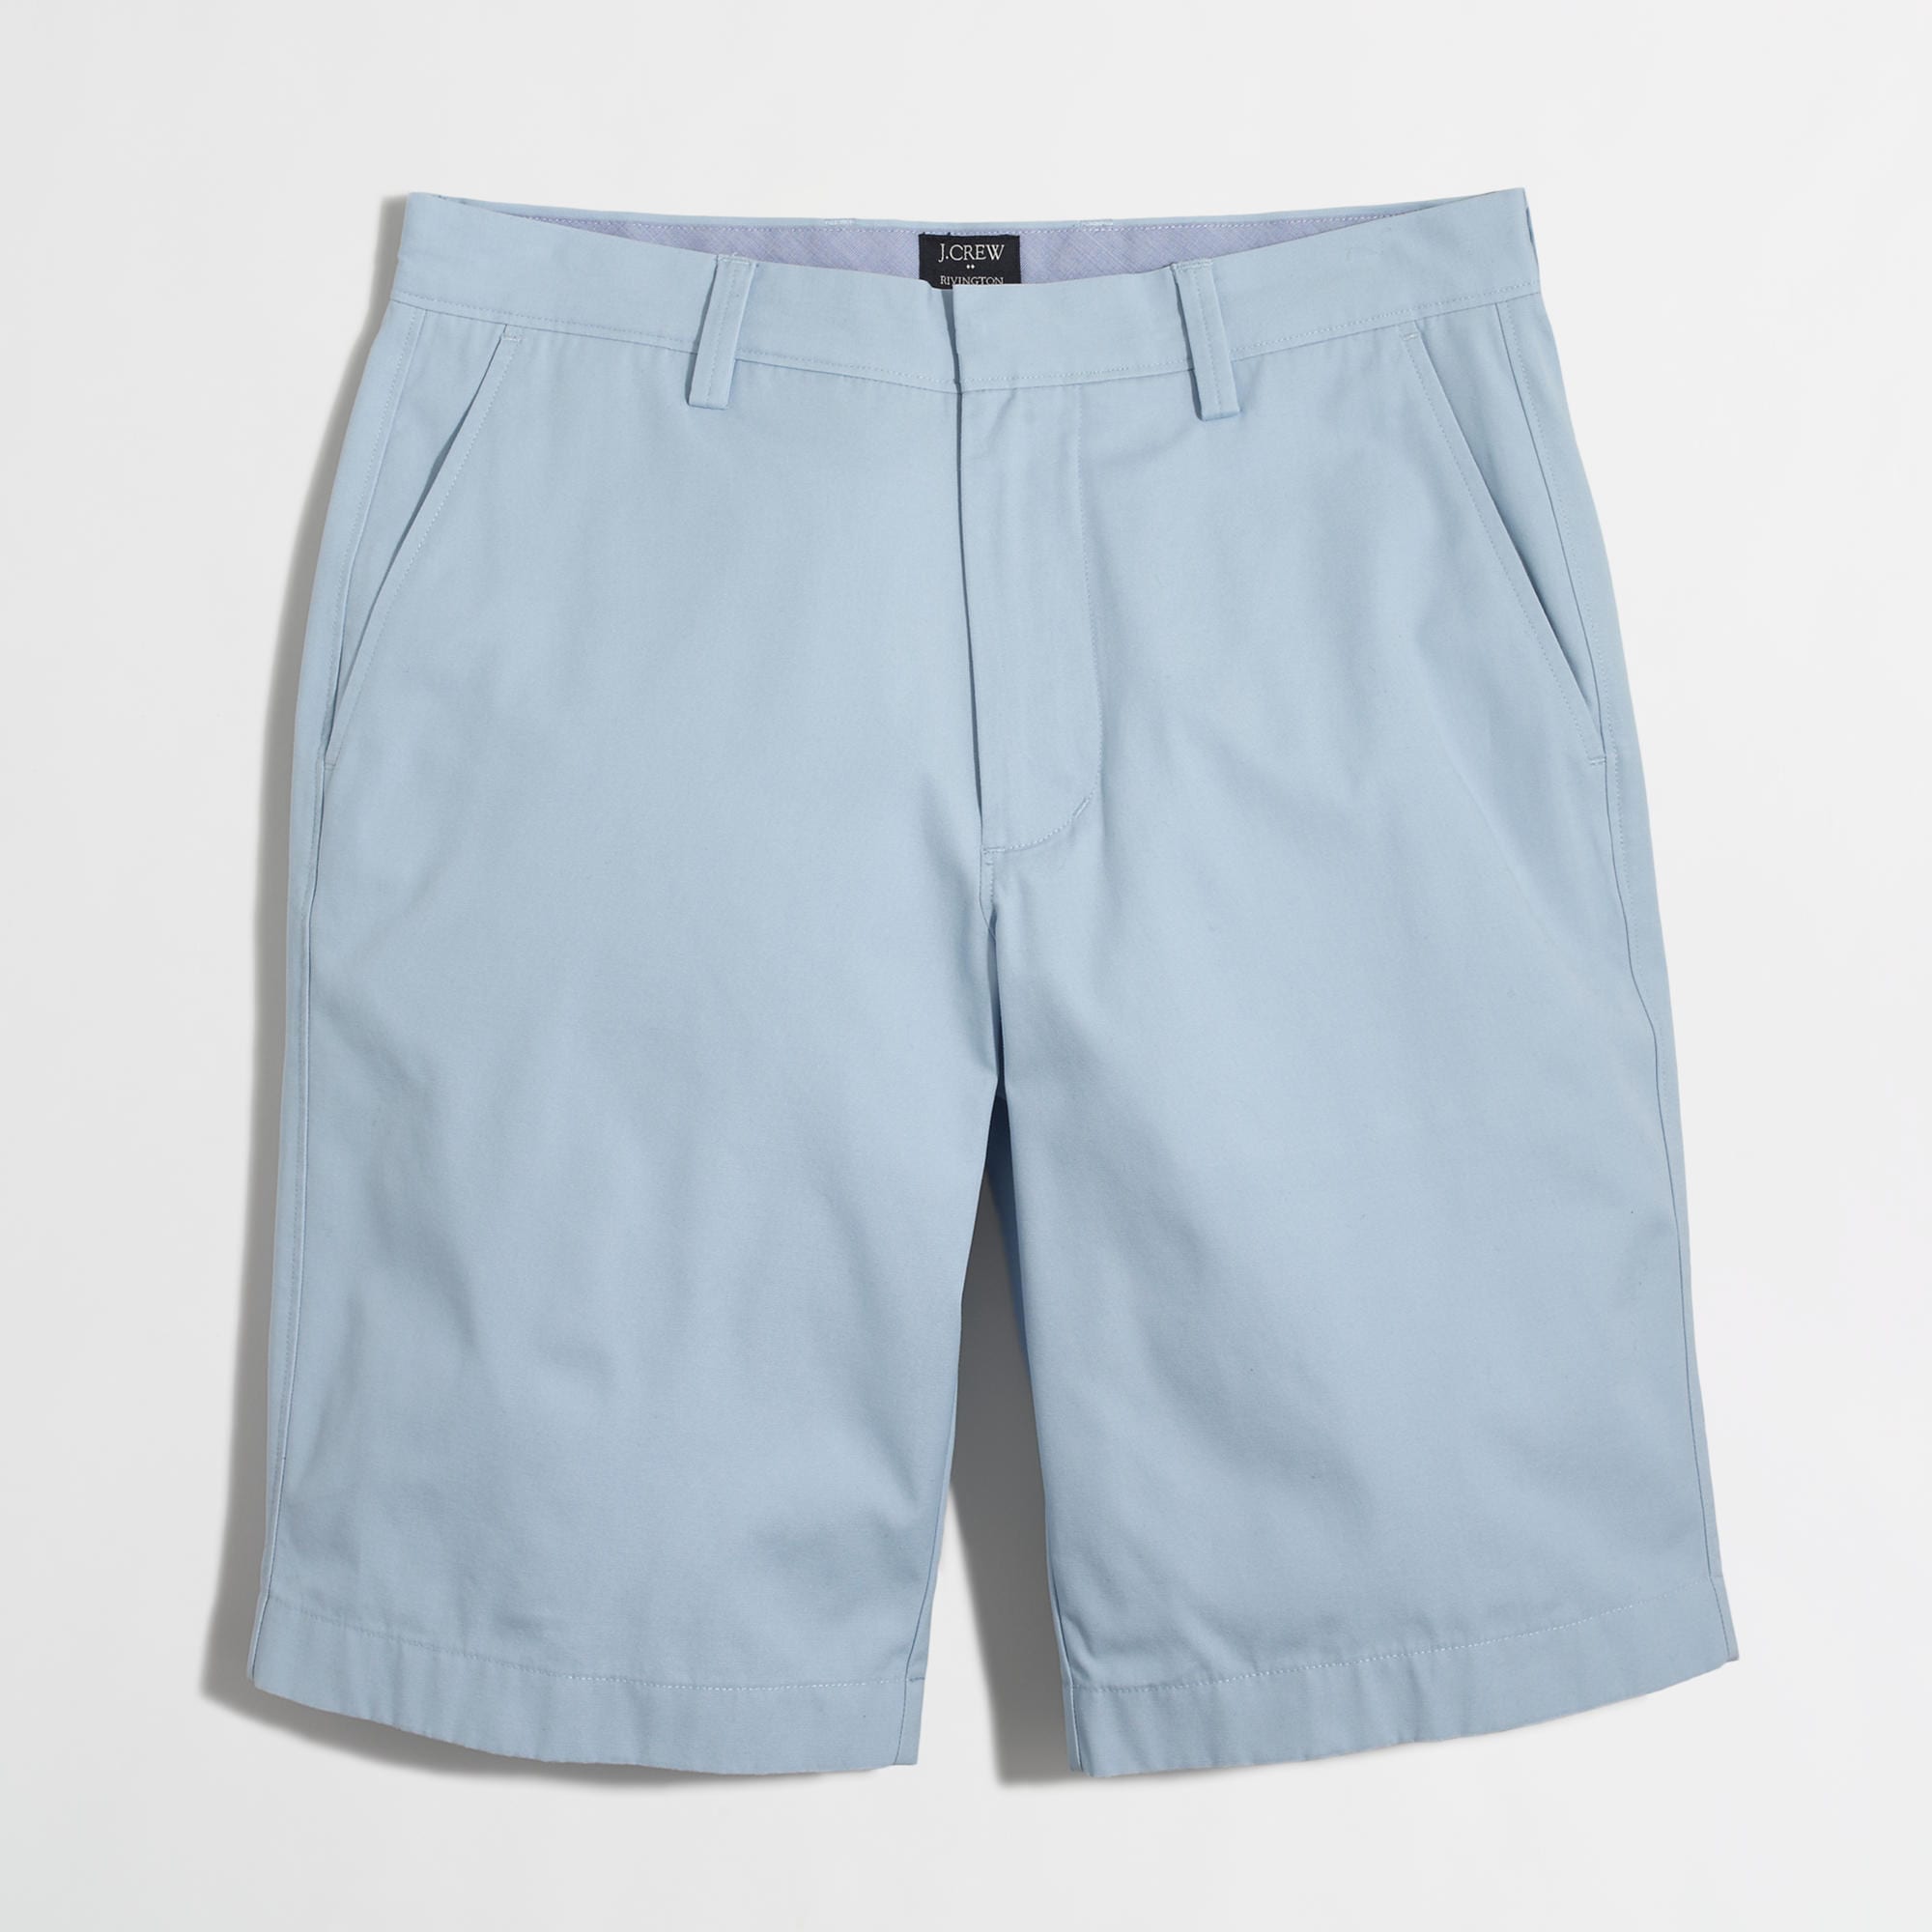 chateau-blue-11-inch-shorts-for-men-2017-2018